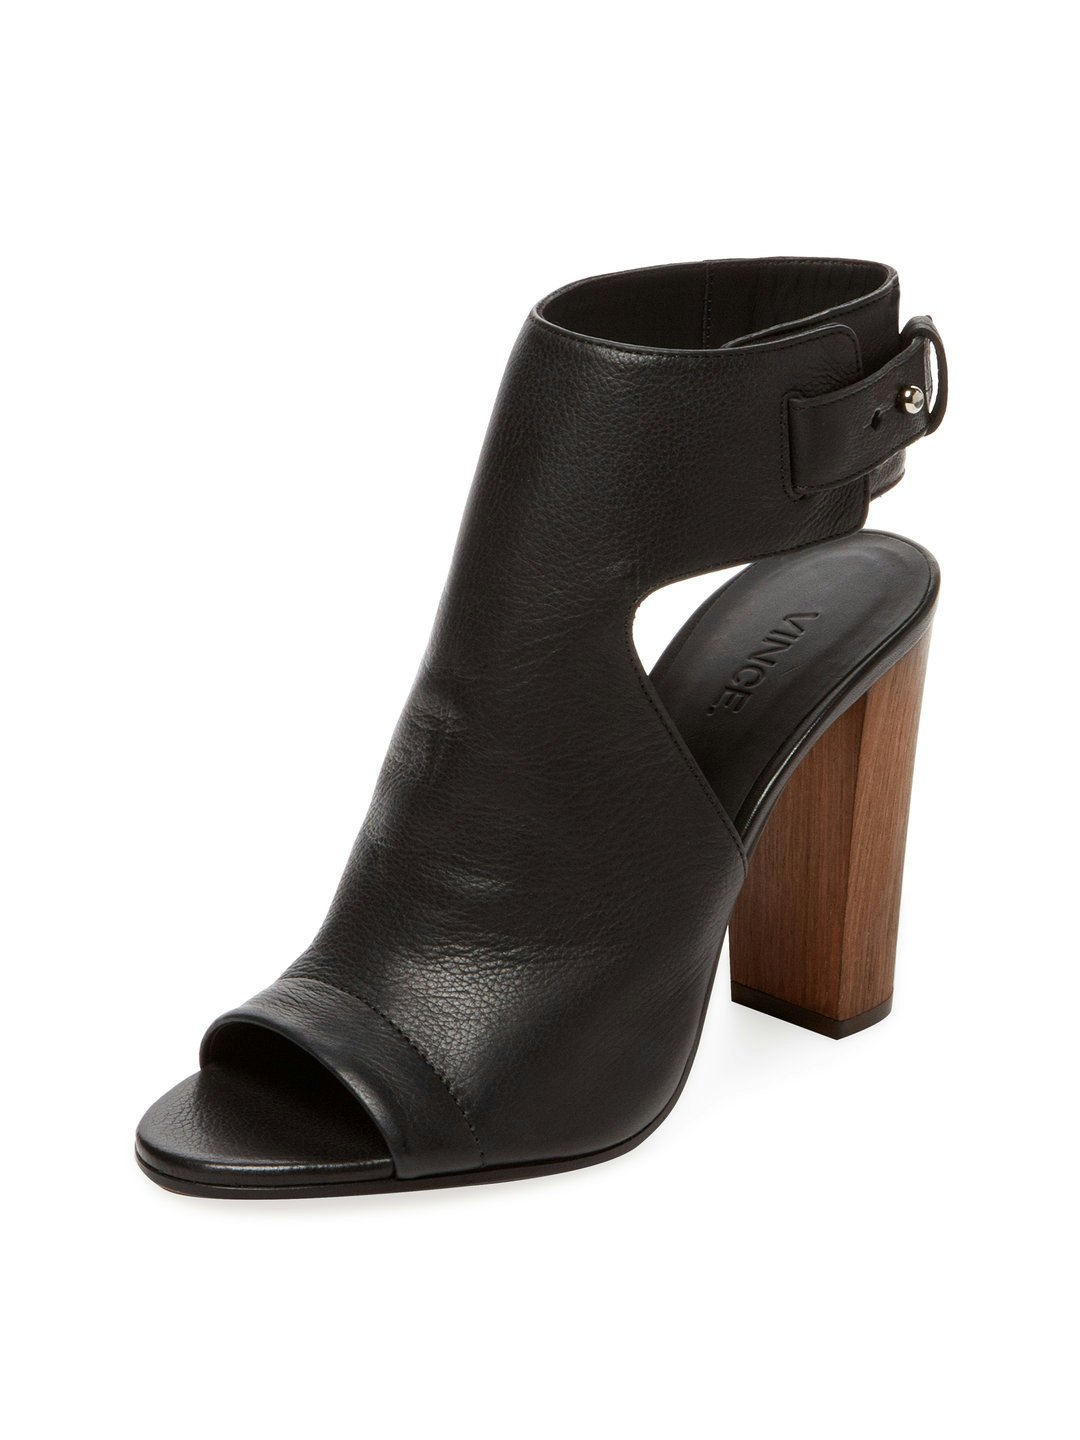 Buy > mules that stay on your feet > in stock